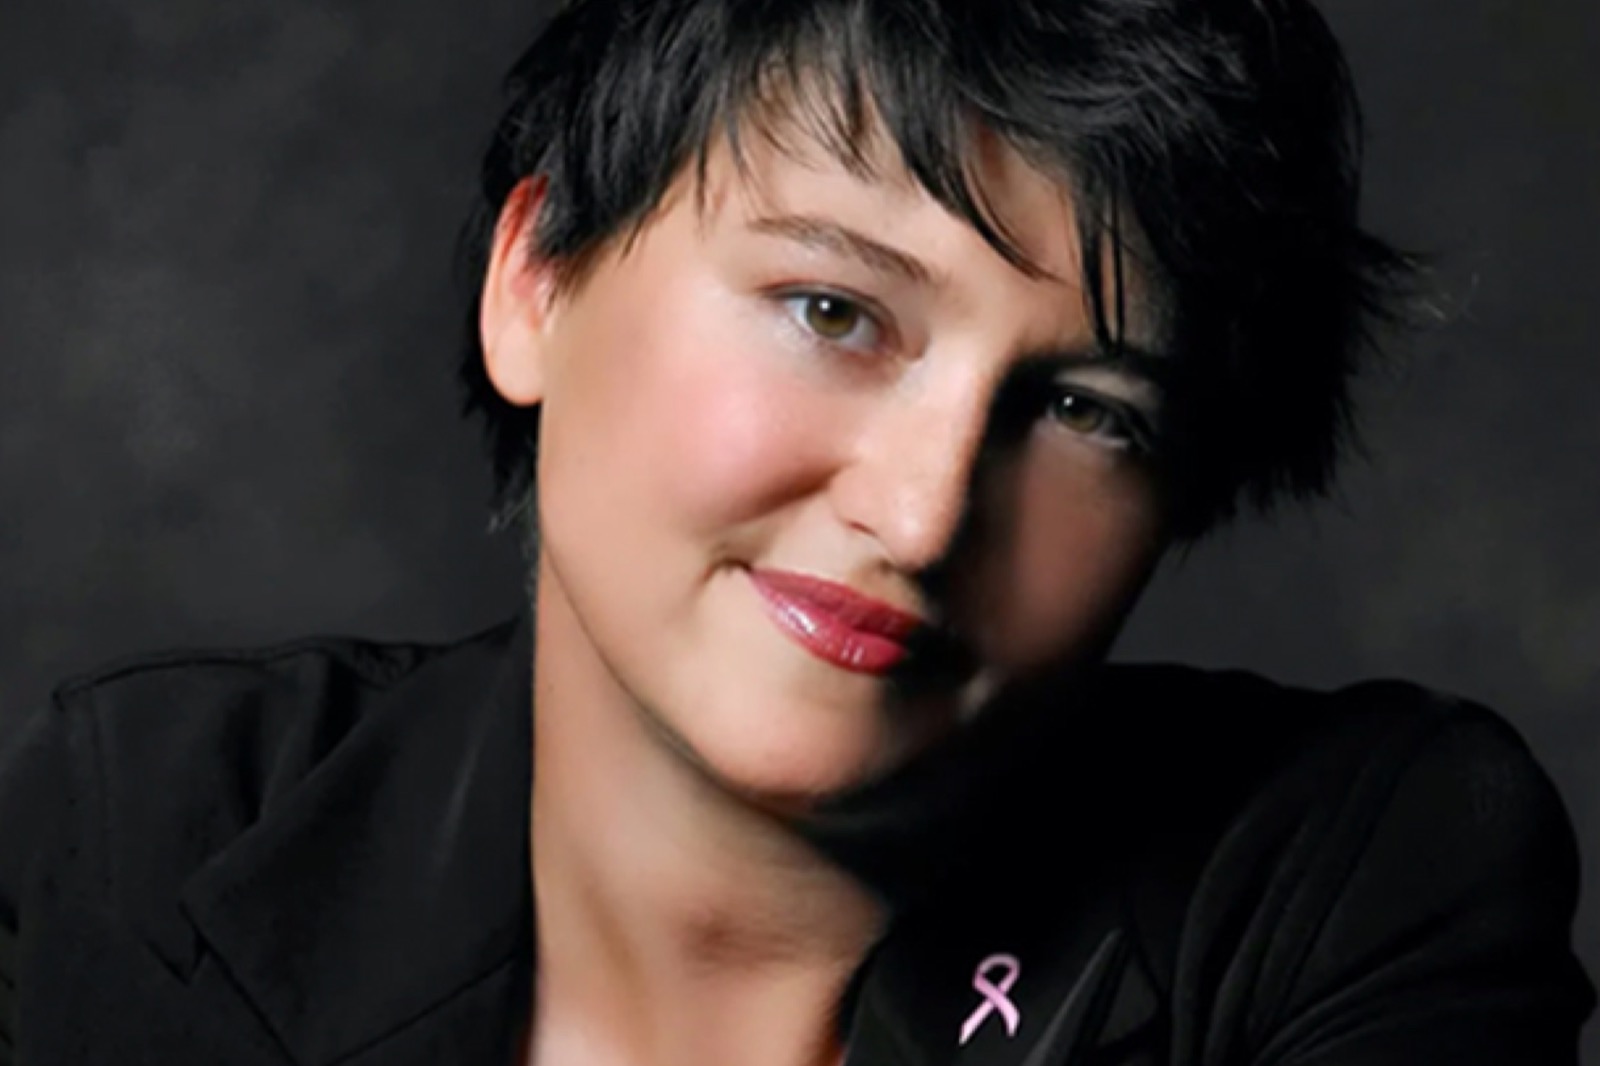 Woman slightly smiling at camera wearing a pink breast cancer awareness pin on collar.